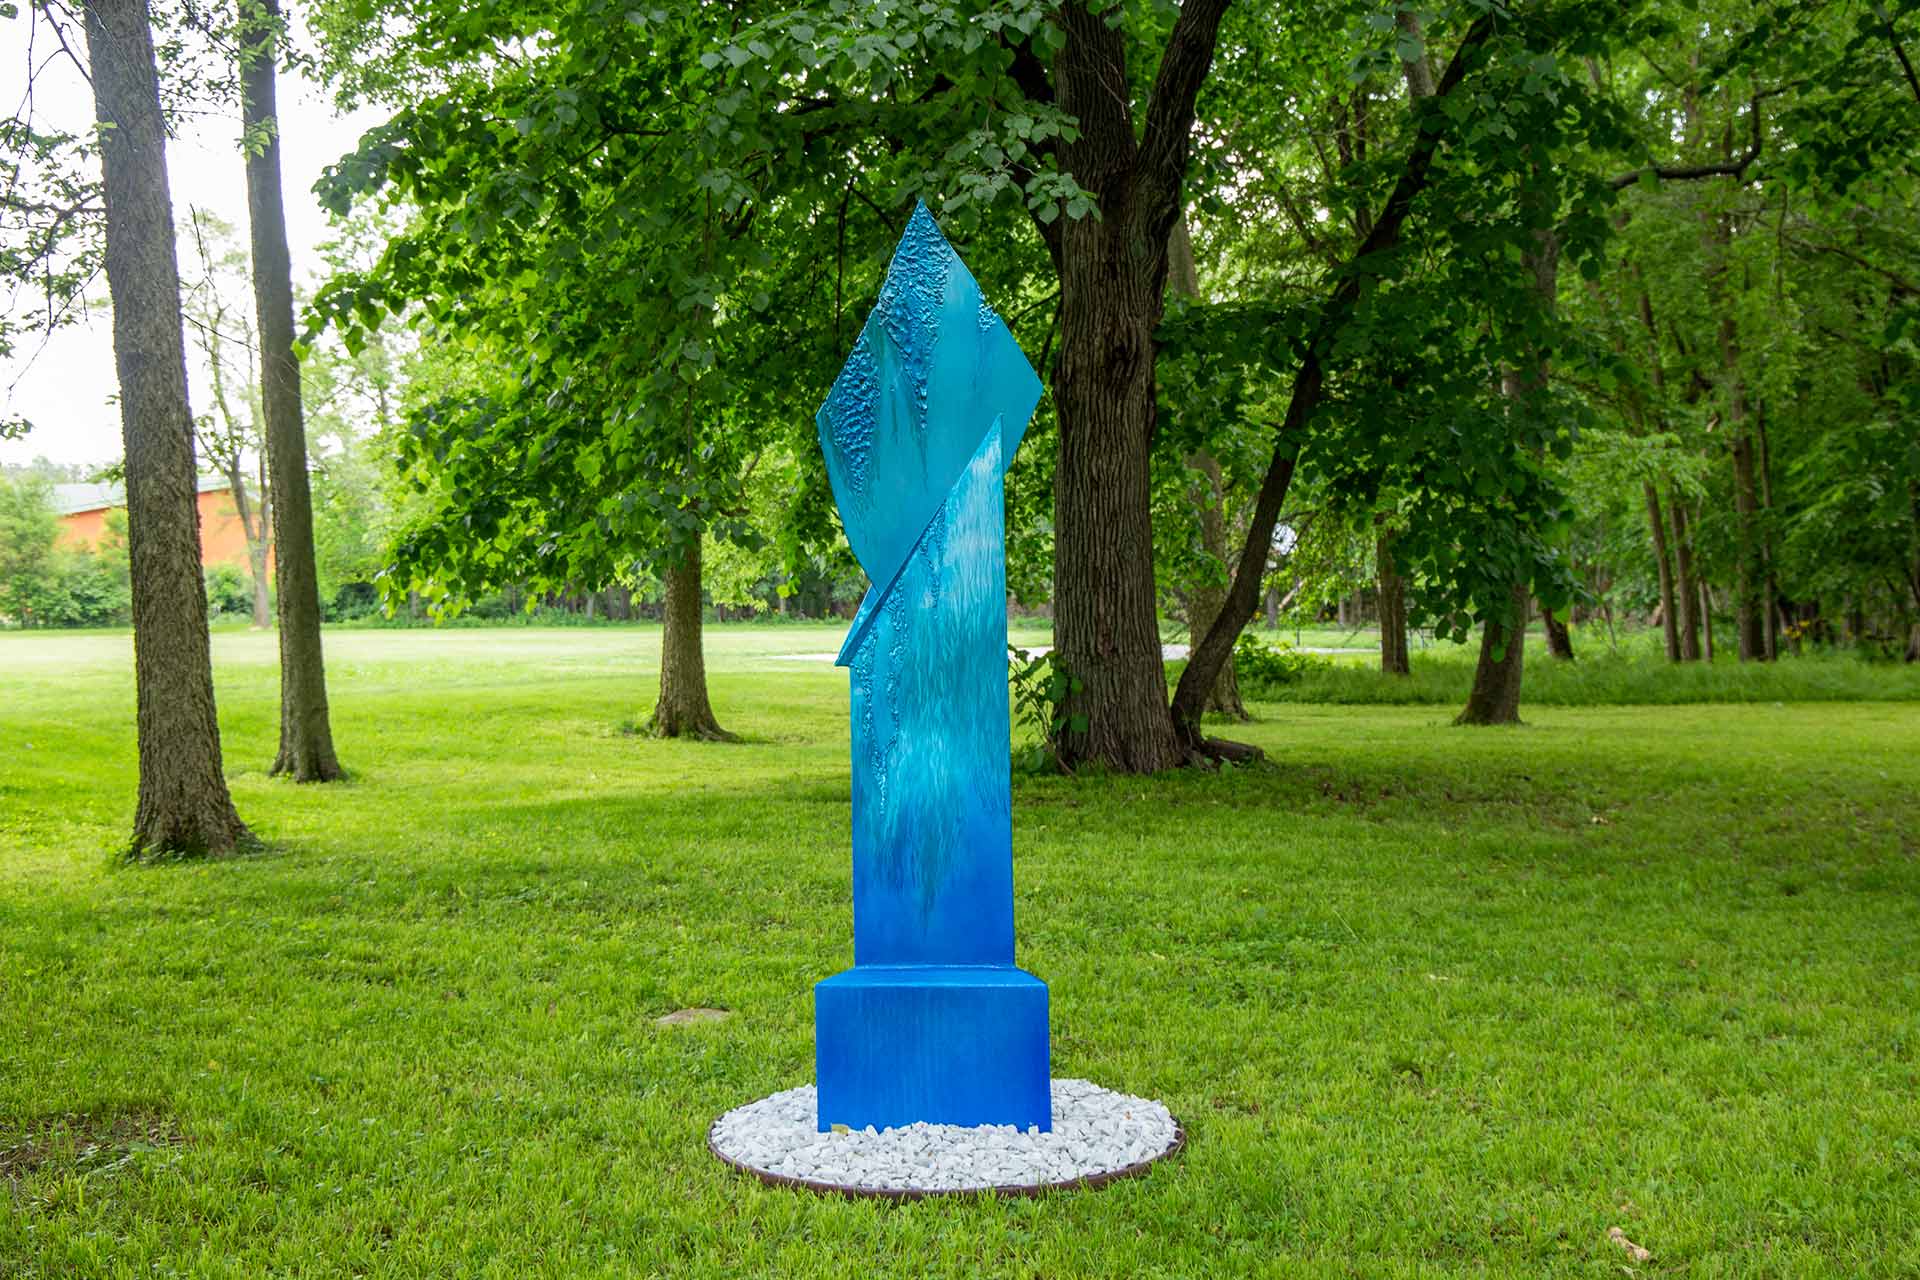 Side-view of a blue icicle on the ground